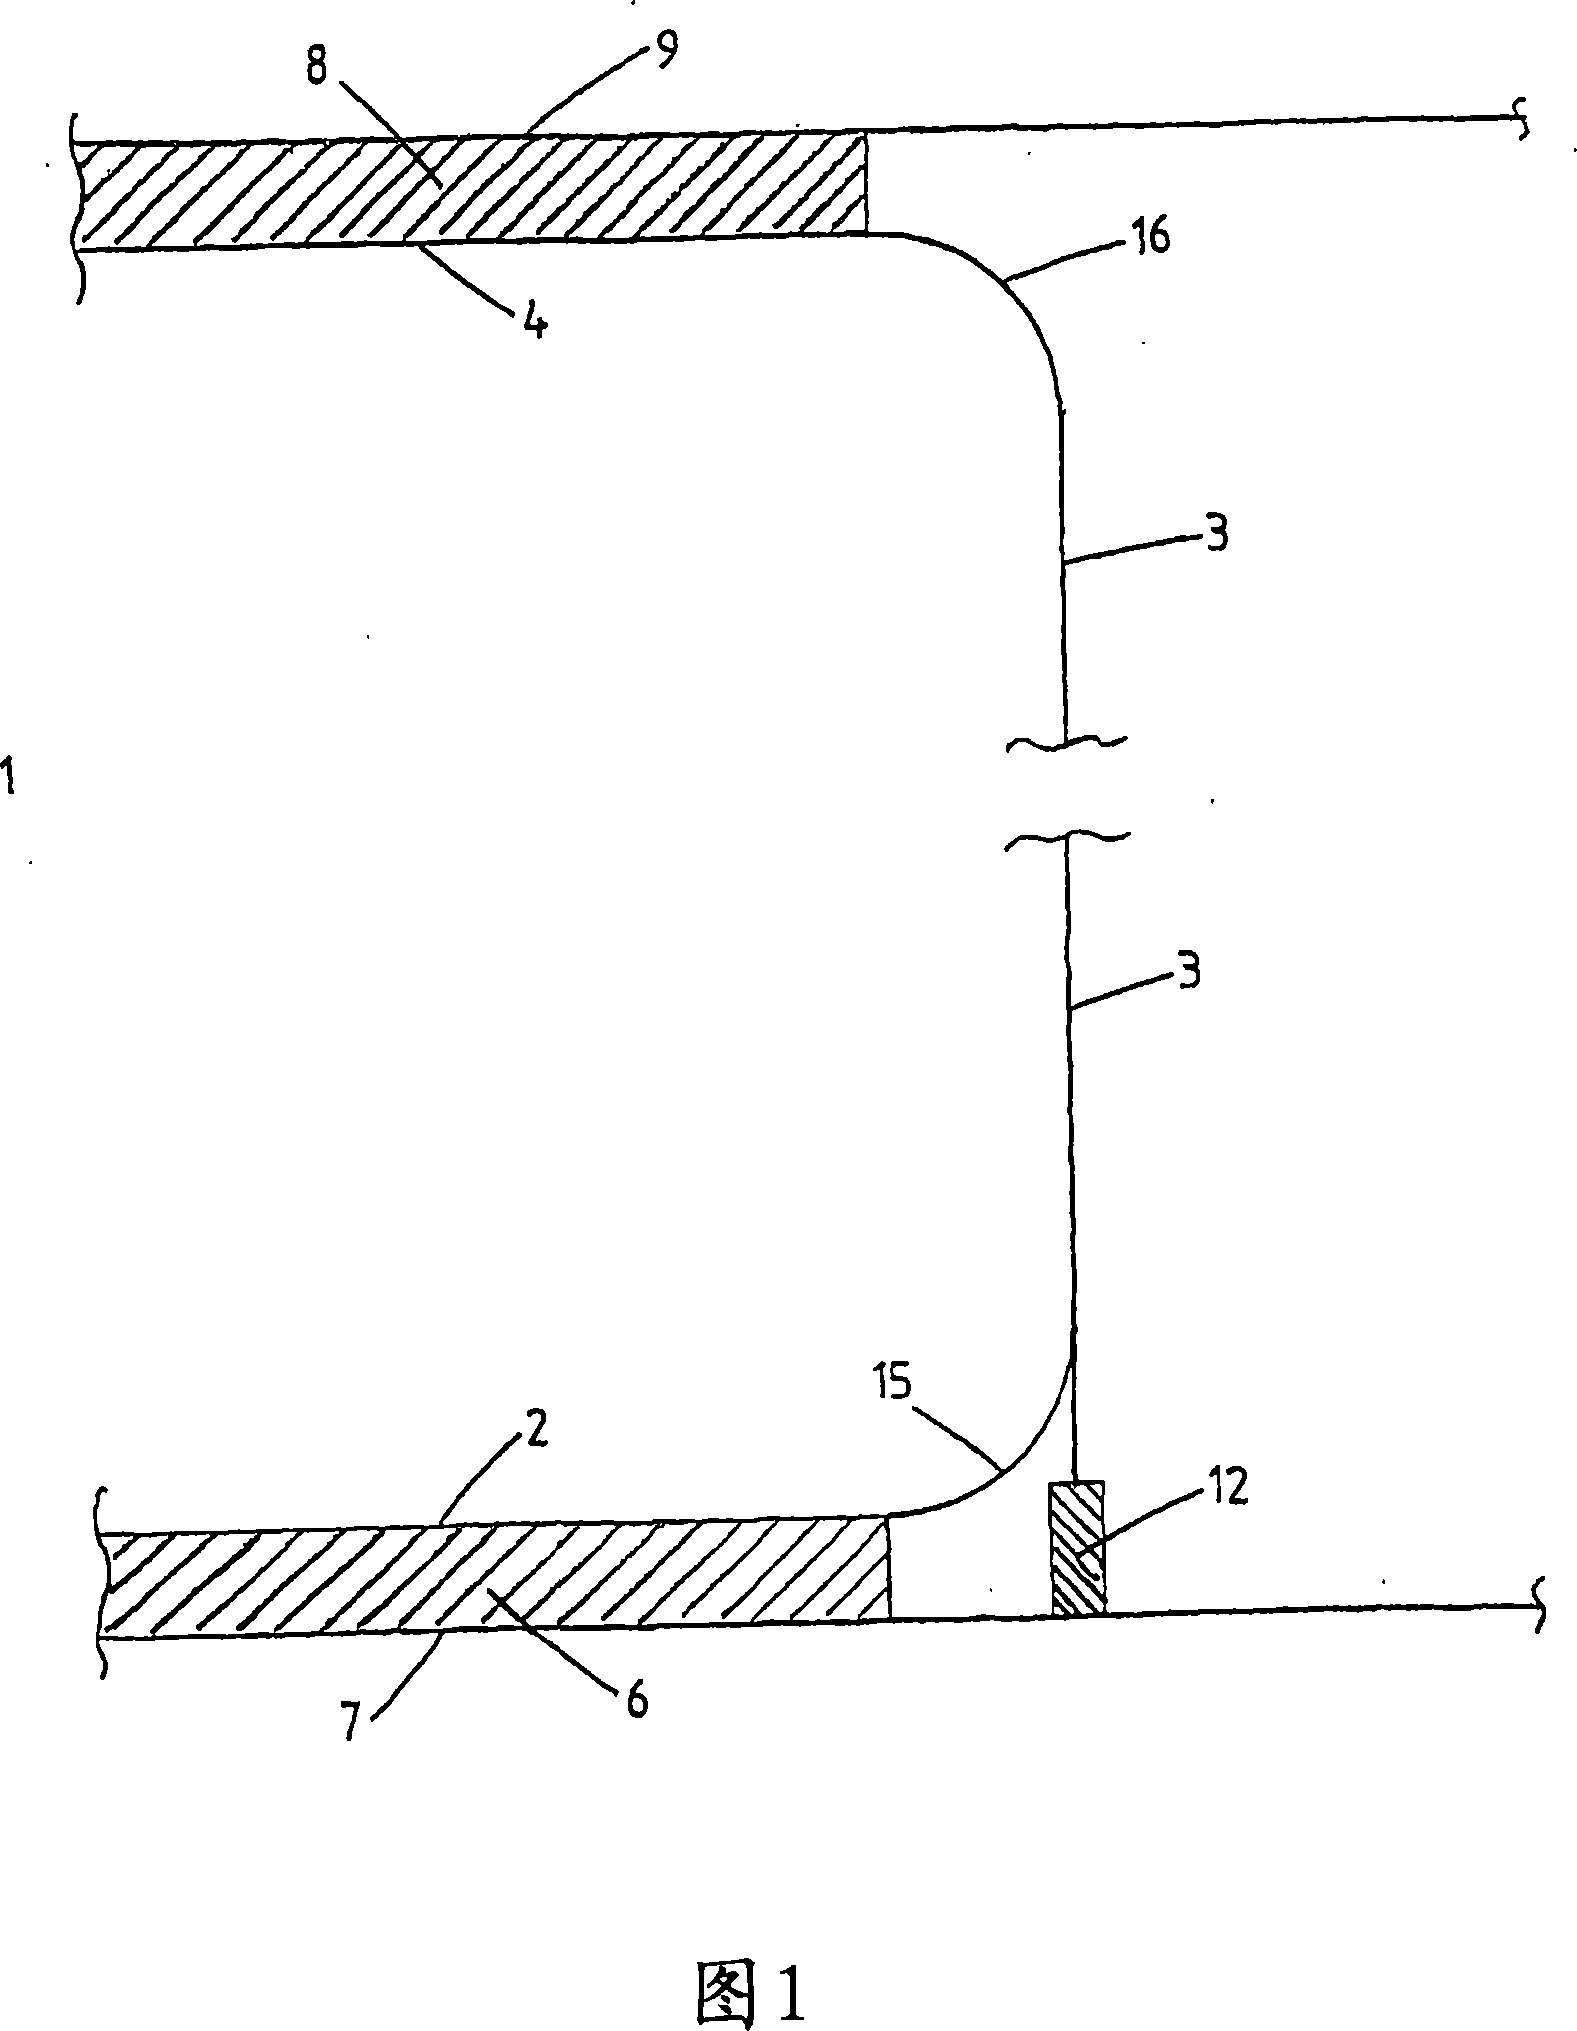 Ship with liquid transport tanks provided with deformation absorbers